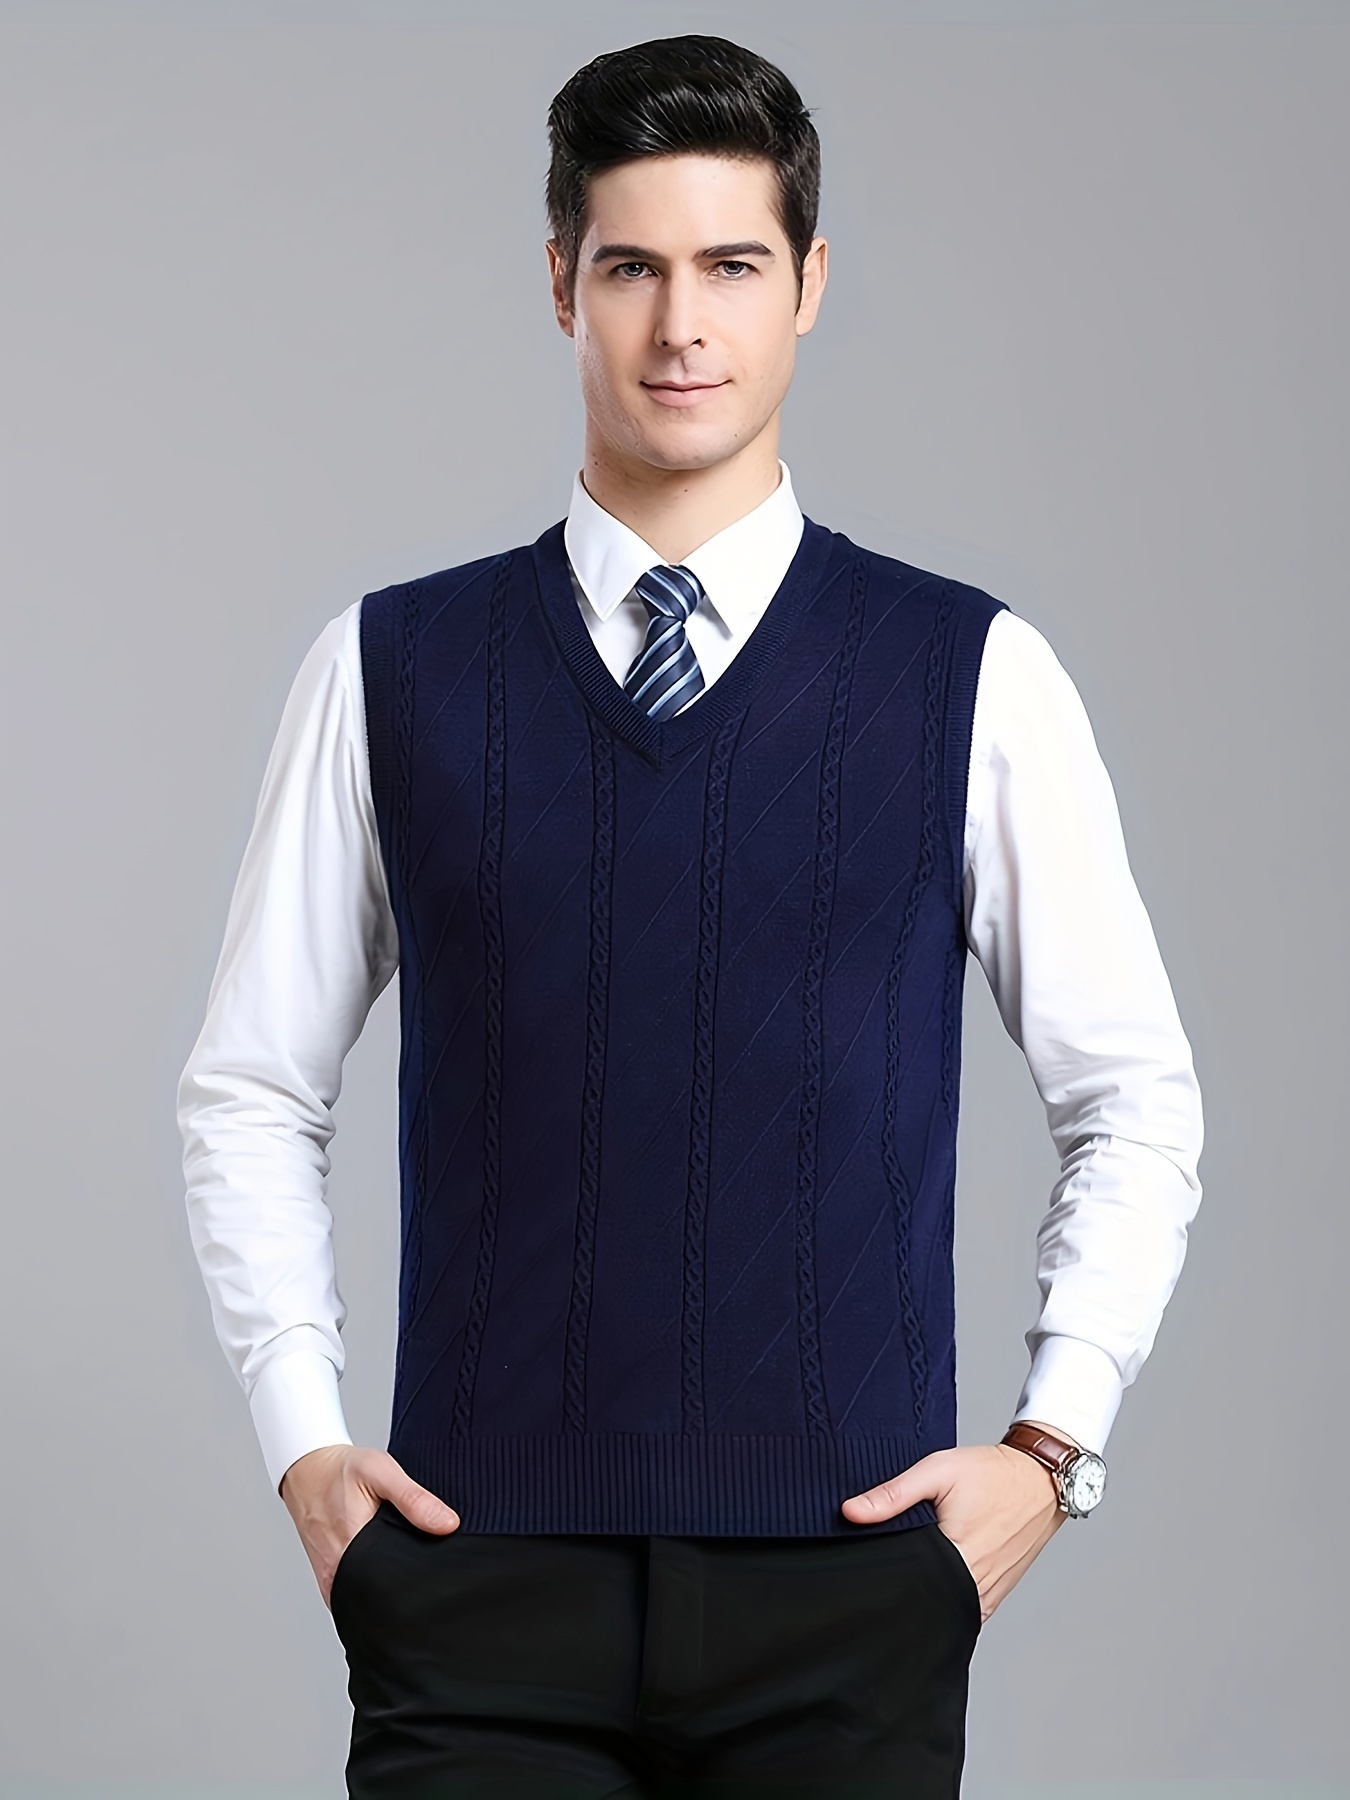 Men's V Neck Sweater Vest, Pullover Solid Color Sleeveless Sweaters Vest,  Preppy Style